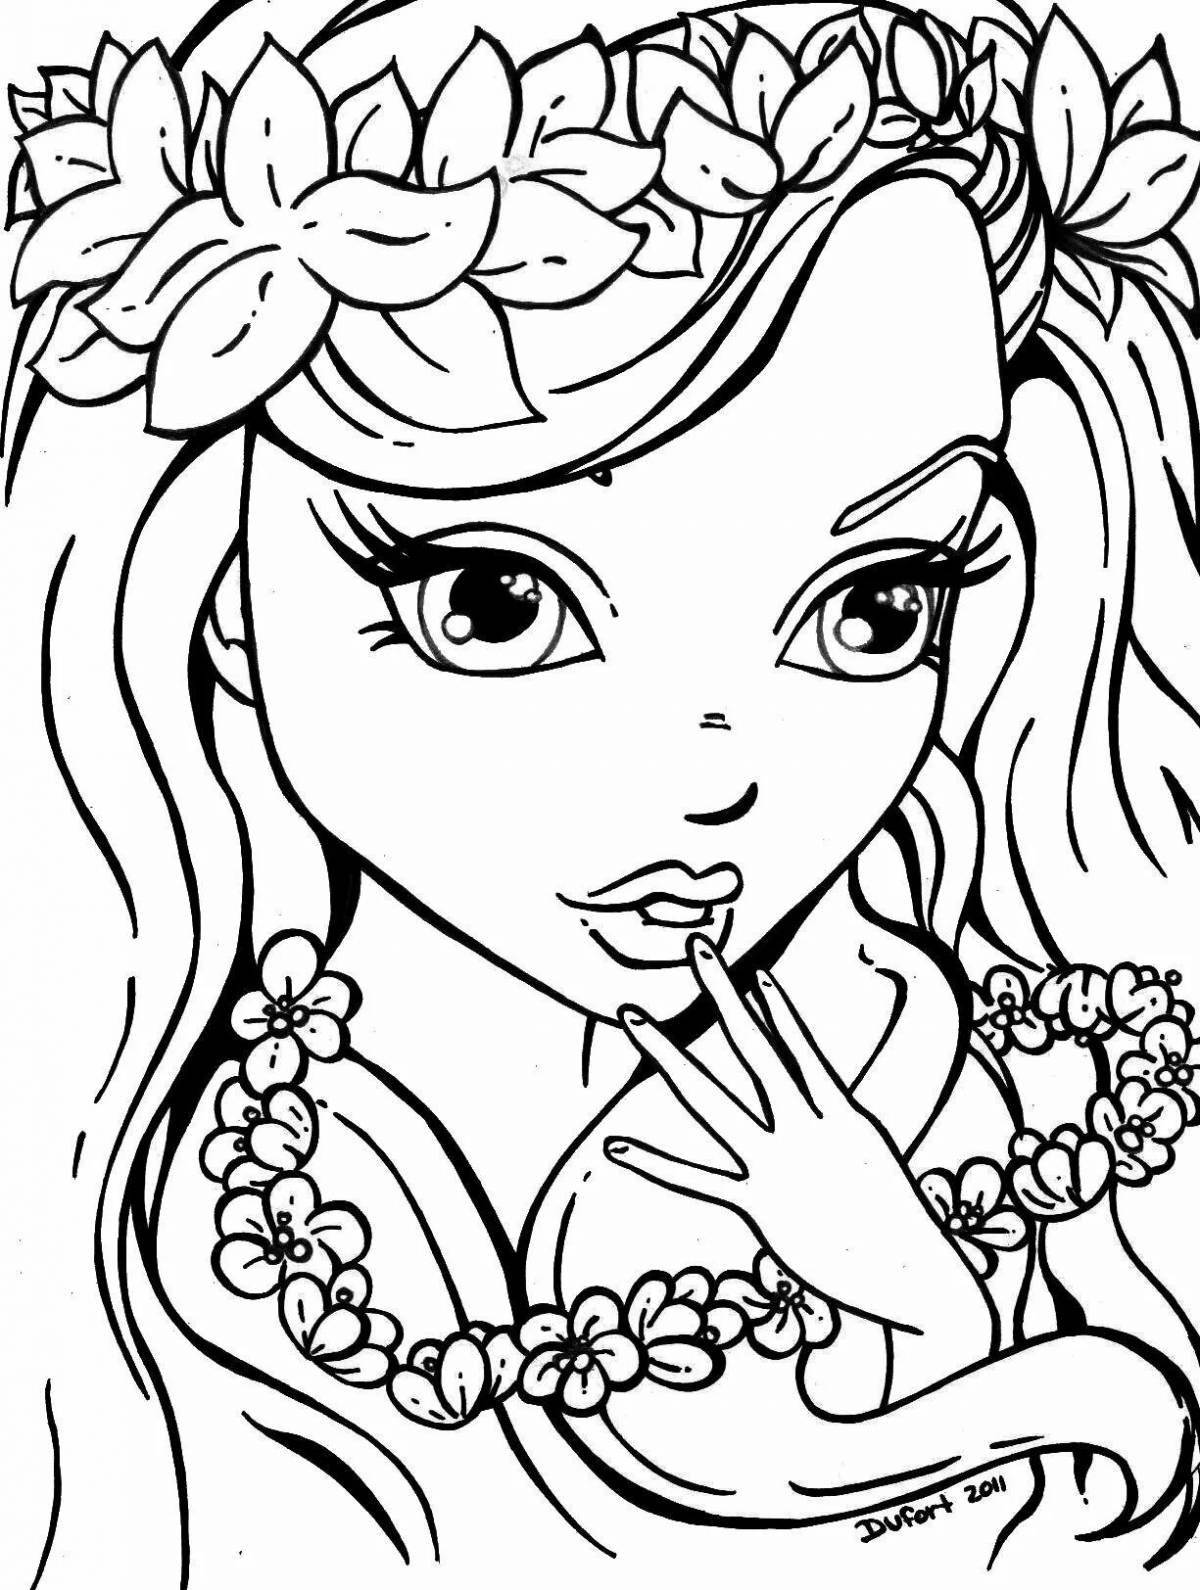 A fun coloring game for girls 9-10 years old